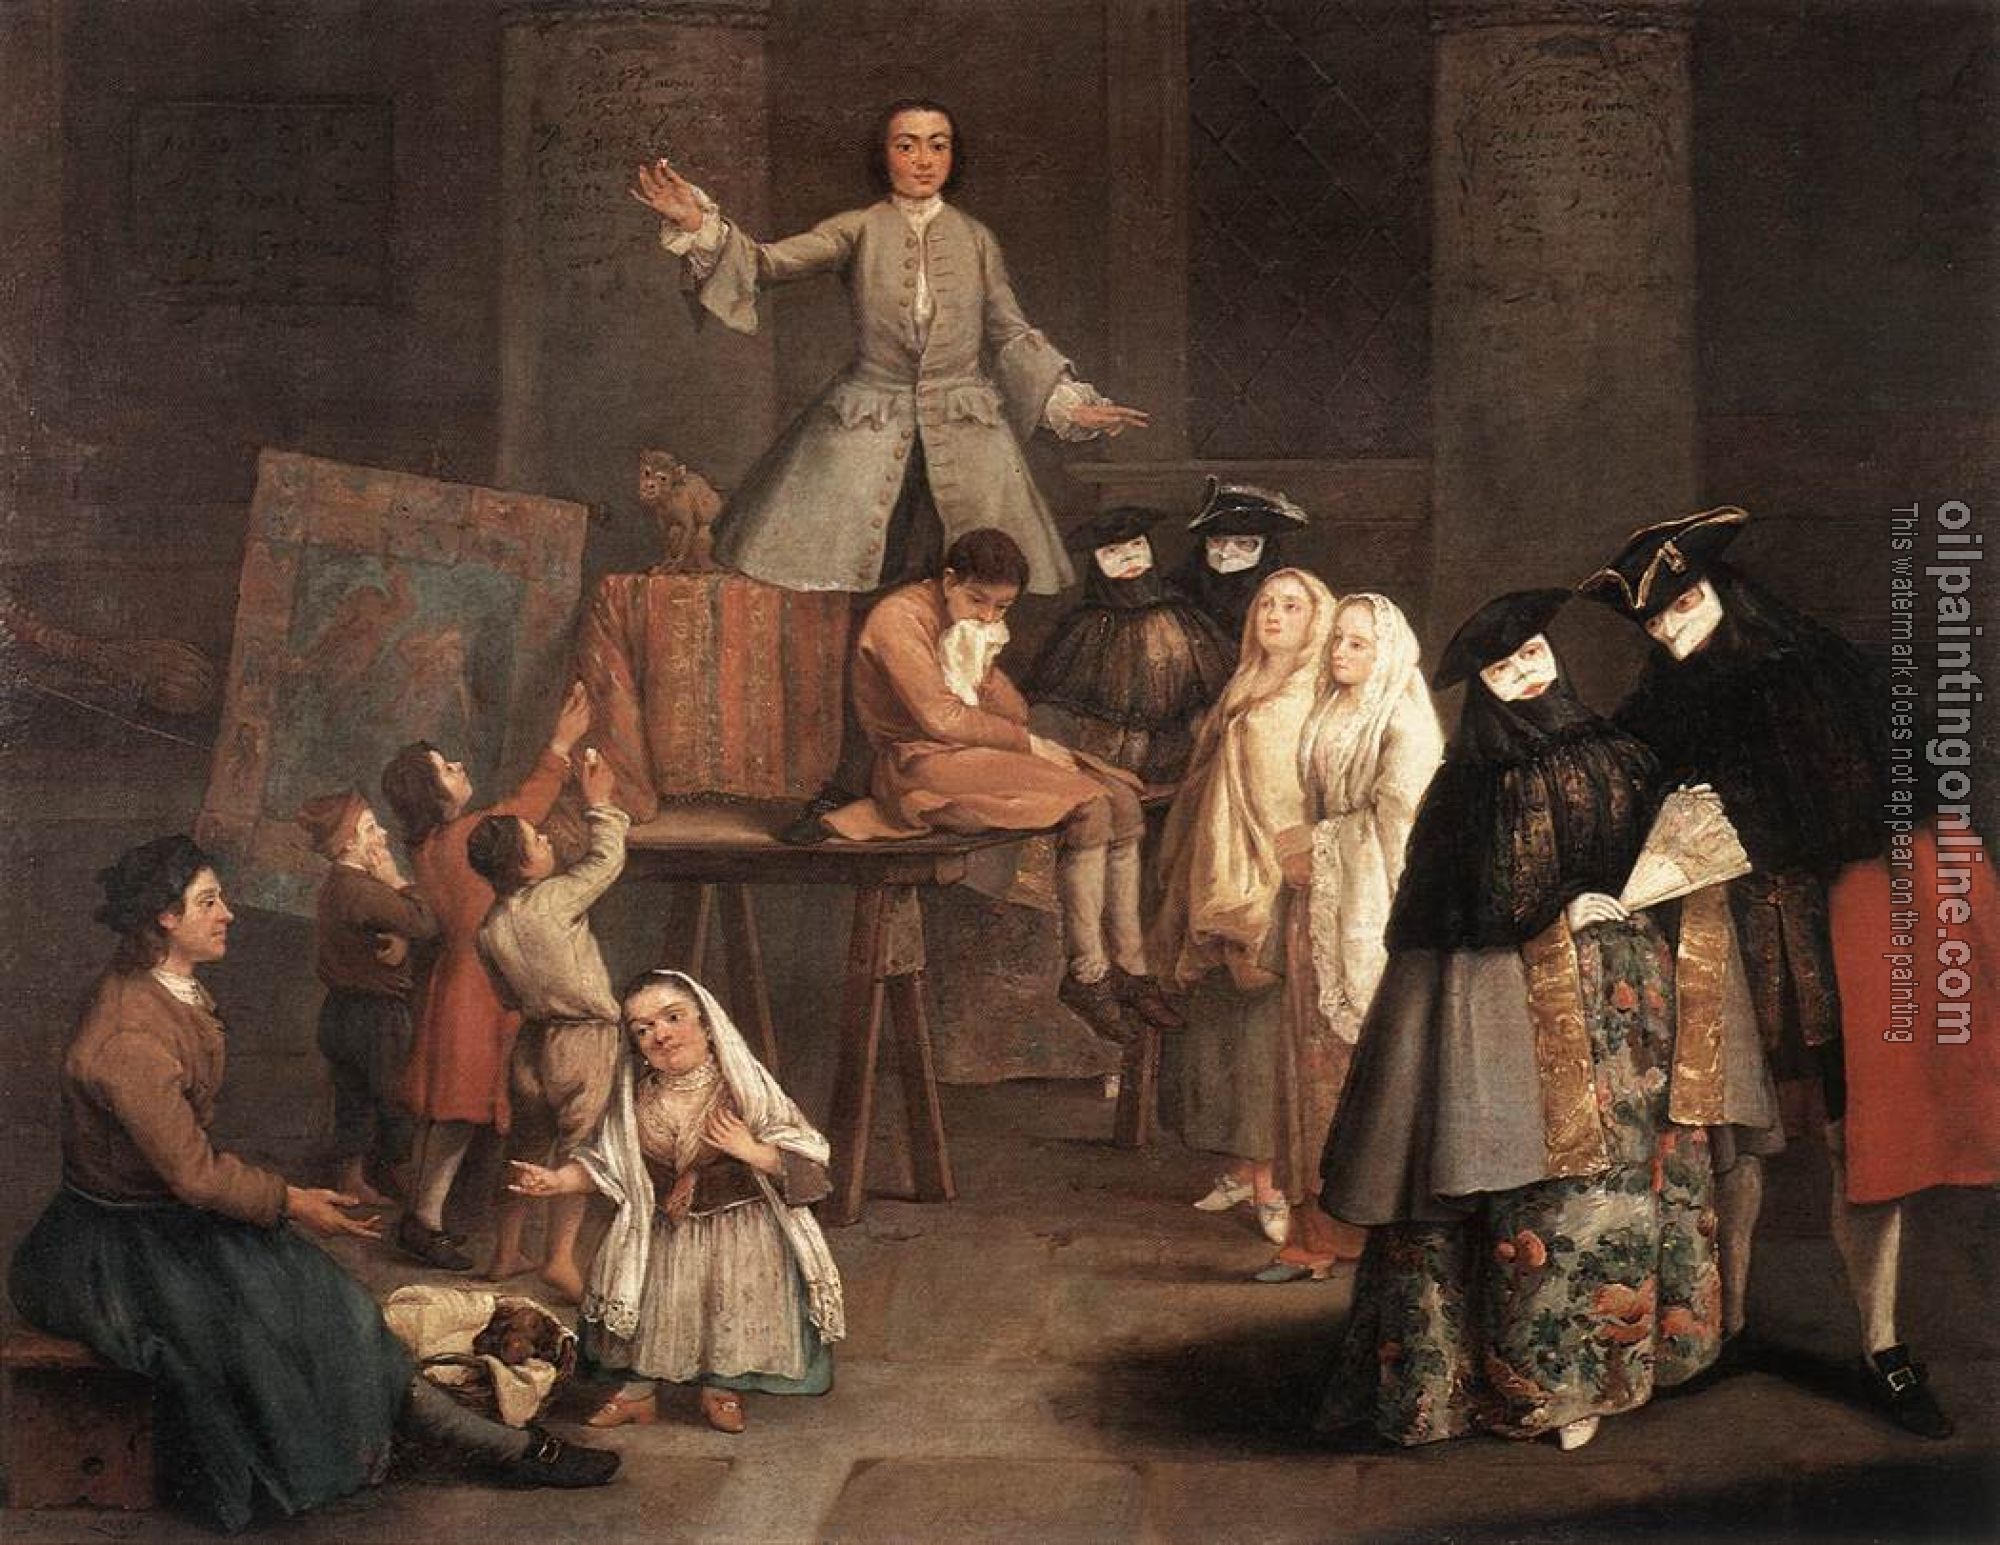 Pietro Longhi - The Tooth Puller